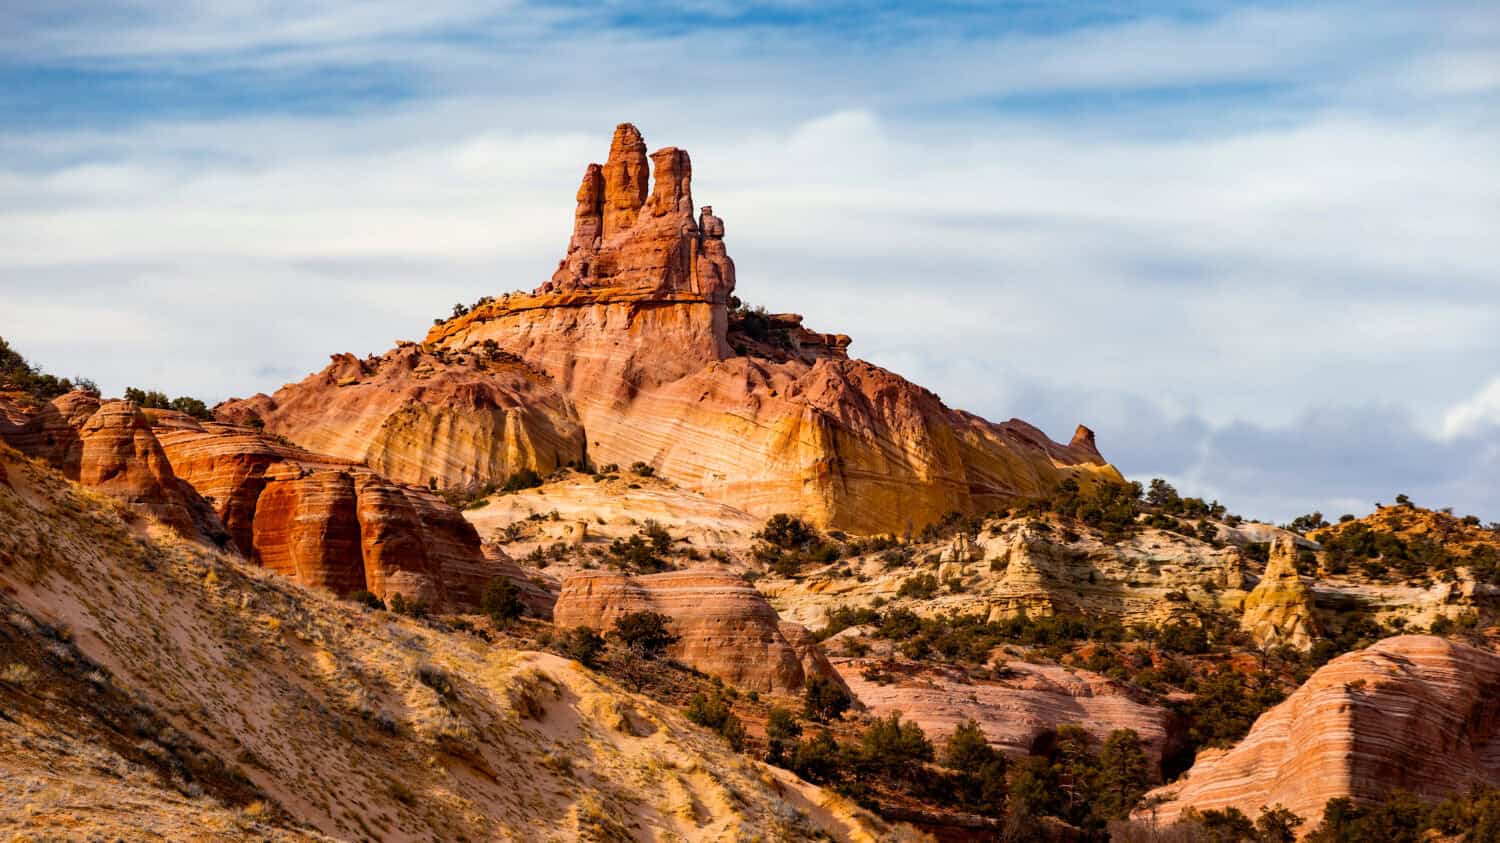 Church Rock in Gallup New Mexico - Shallow Depth of Field - Route 66 by Neil Lockhart